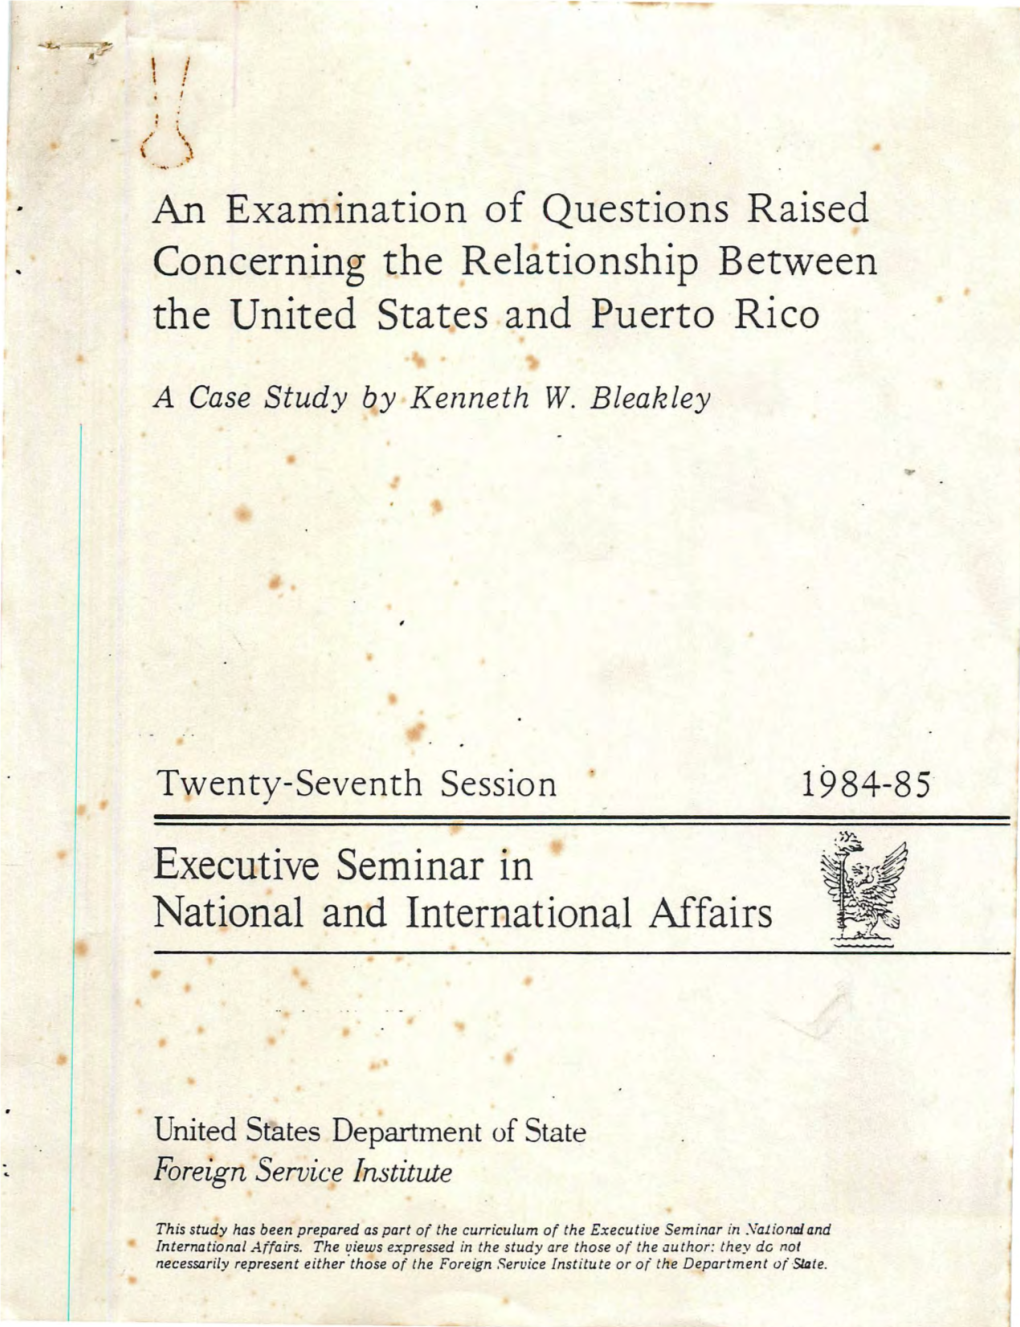 An Examination of Questions Raised Concerning the Relationship Between the United States and Puerto Rico: a Case Study by Kennet